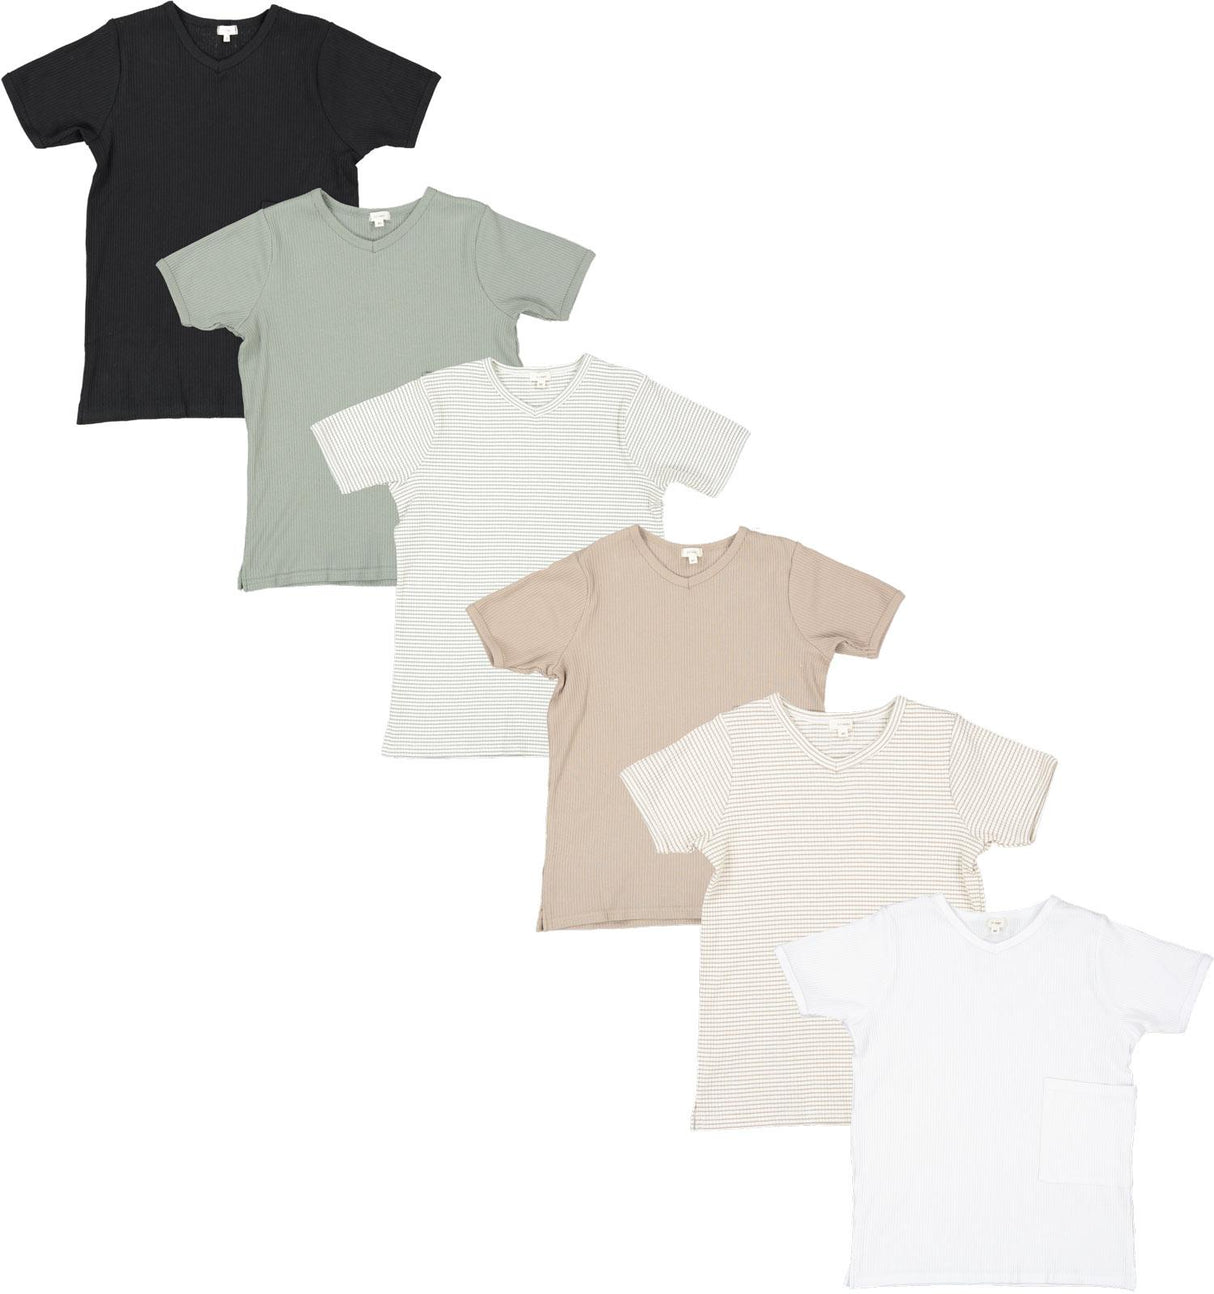 Lil Legs Ribbed Fashion Collection Boys Short Sleeve V-Tee T-shirt